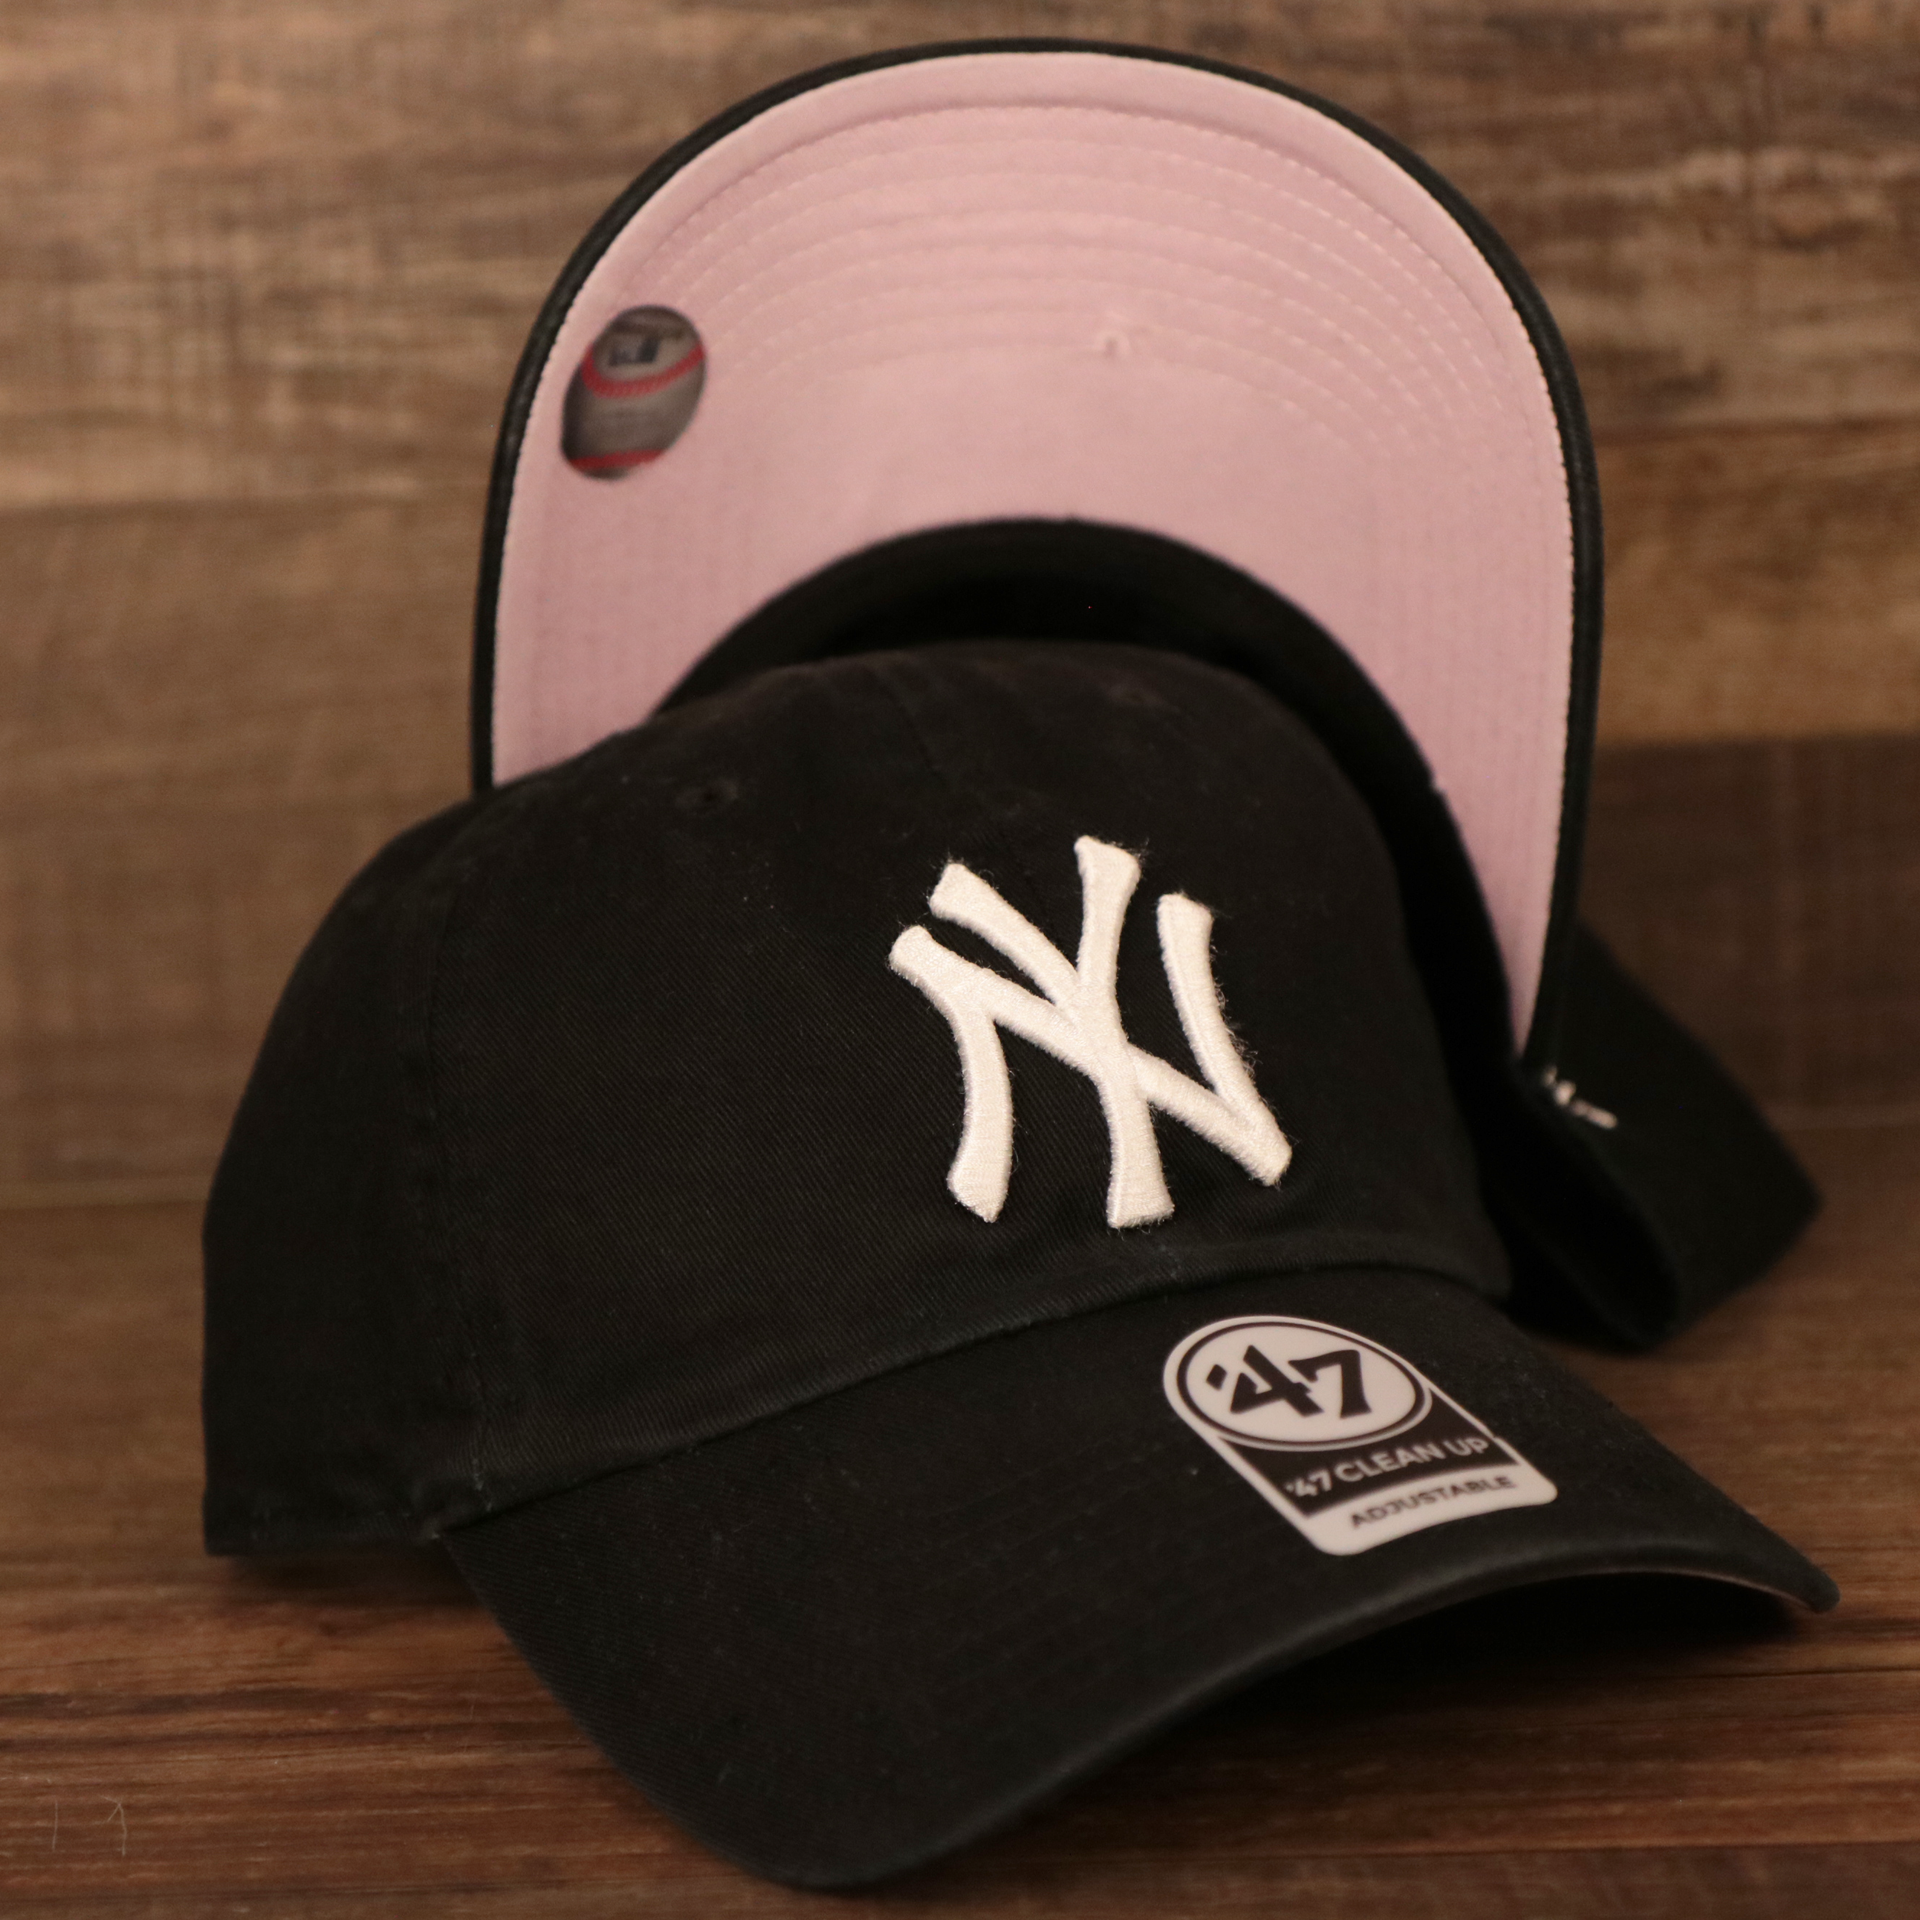 The top and bottom view of this cotton black New York Yankees pink bottom dad hat by 47 Brand.